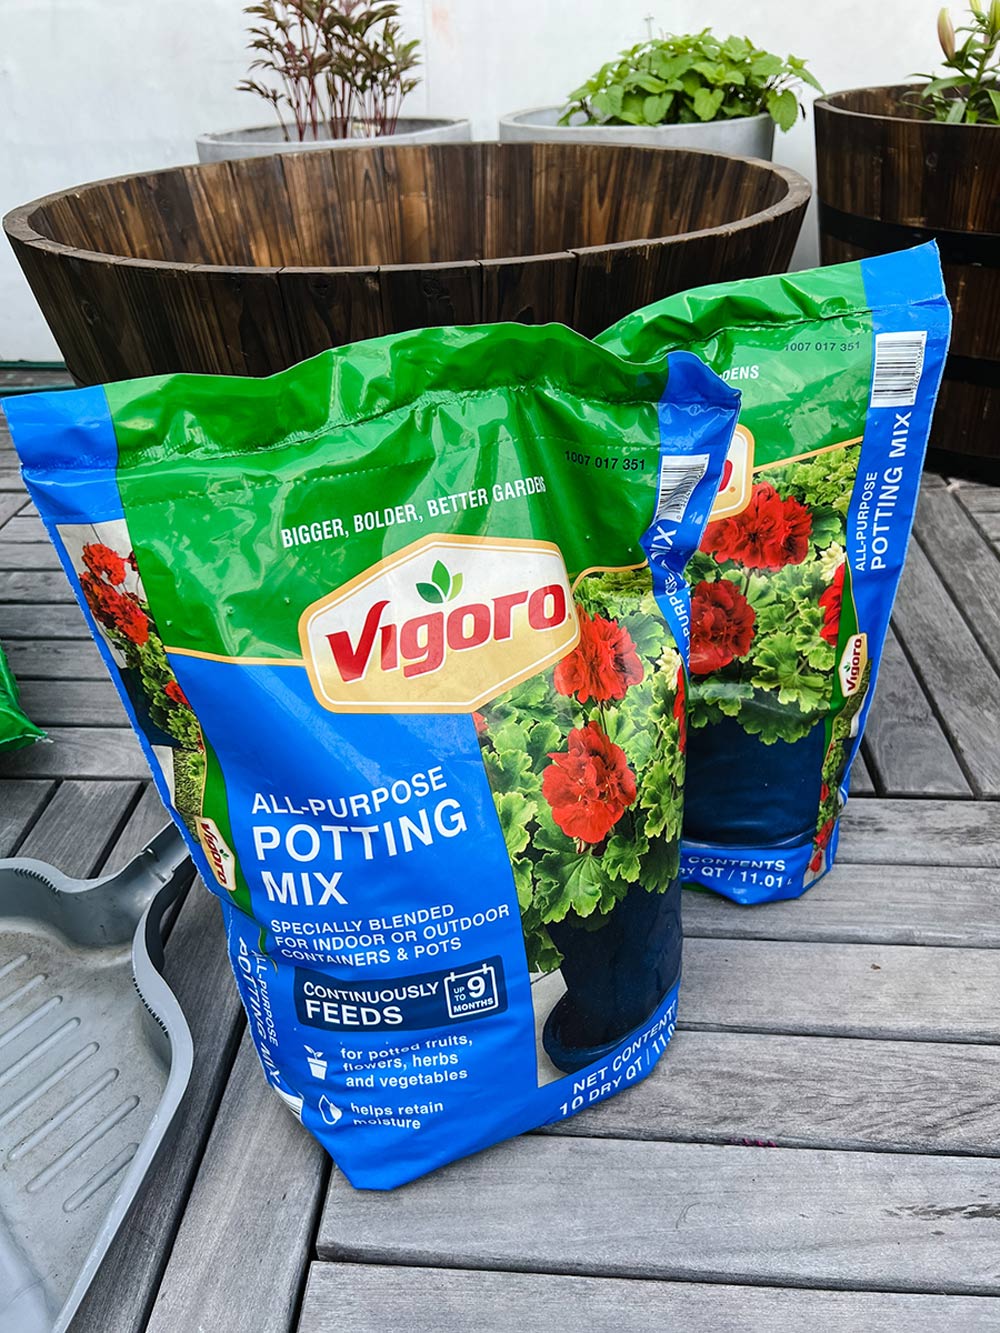 2 bags of Vigoro potting mix in front of an empty planter.